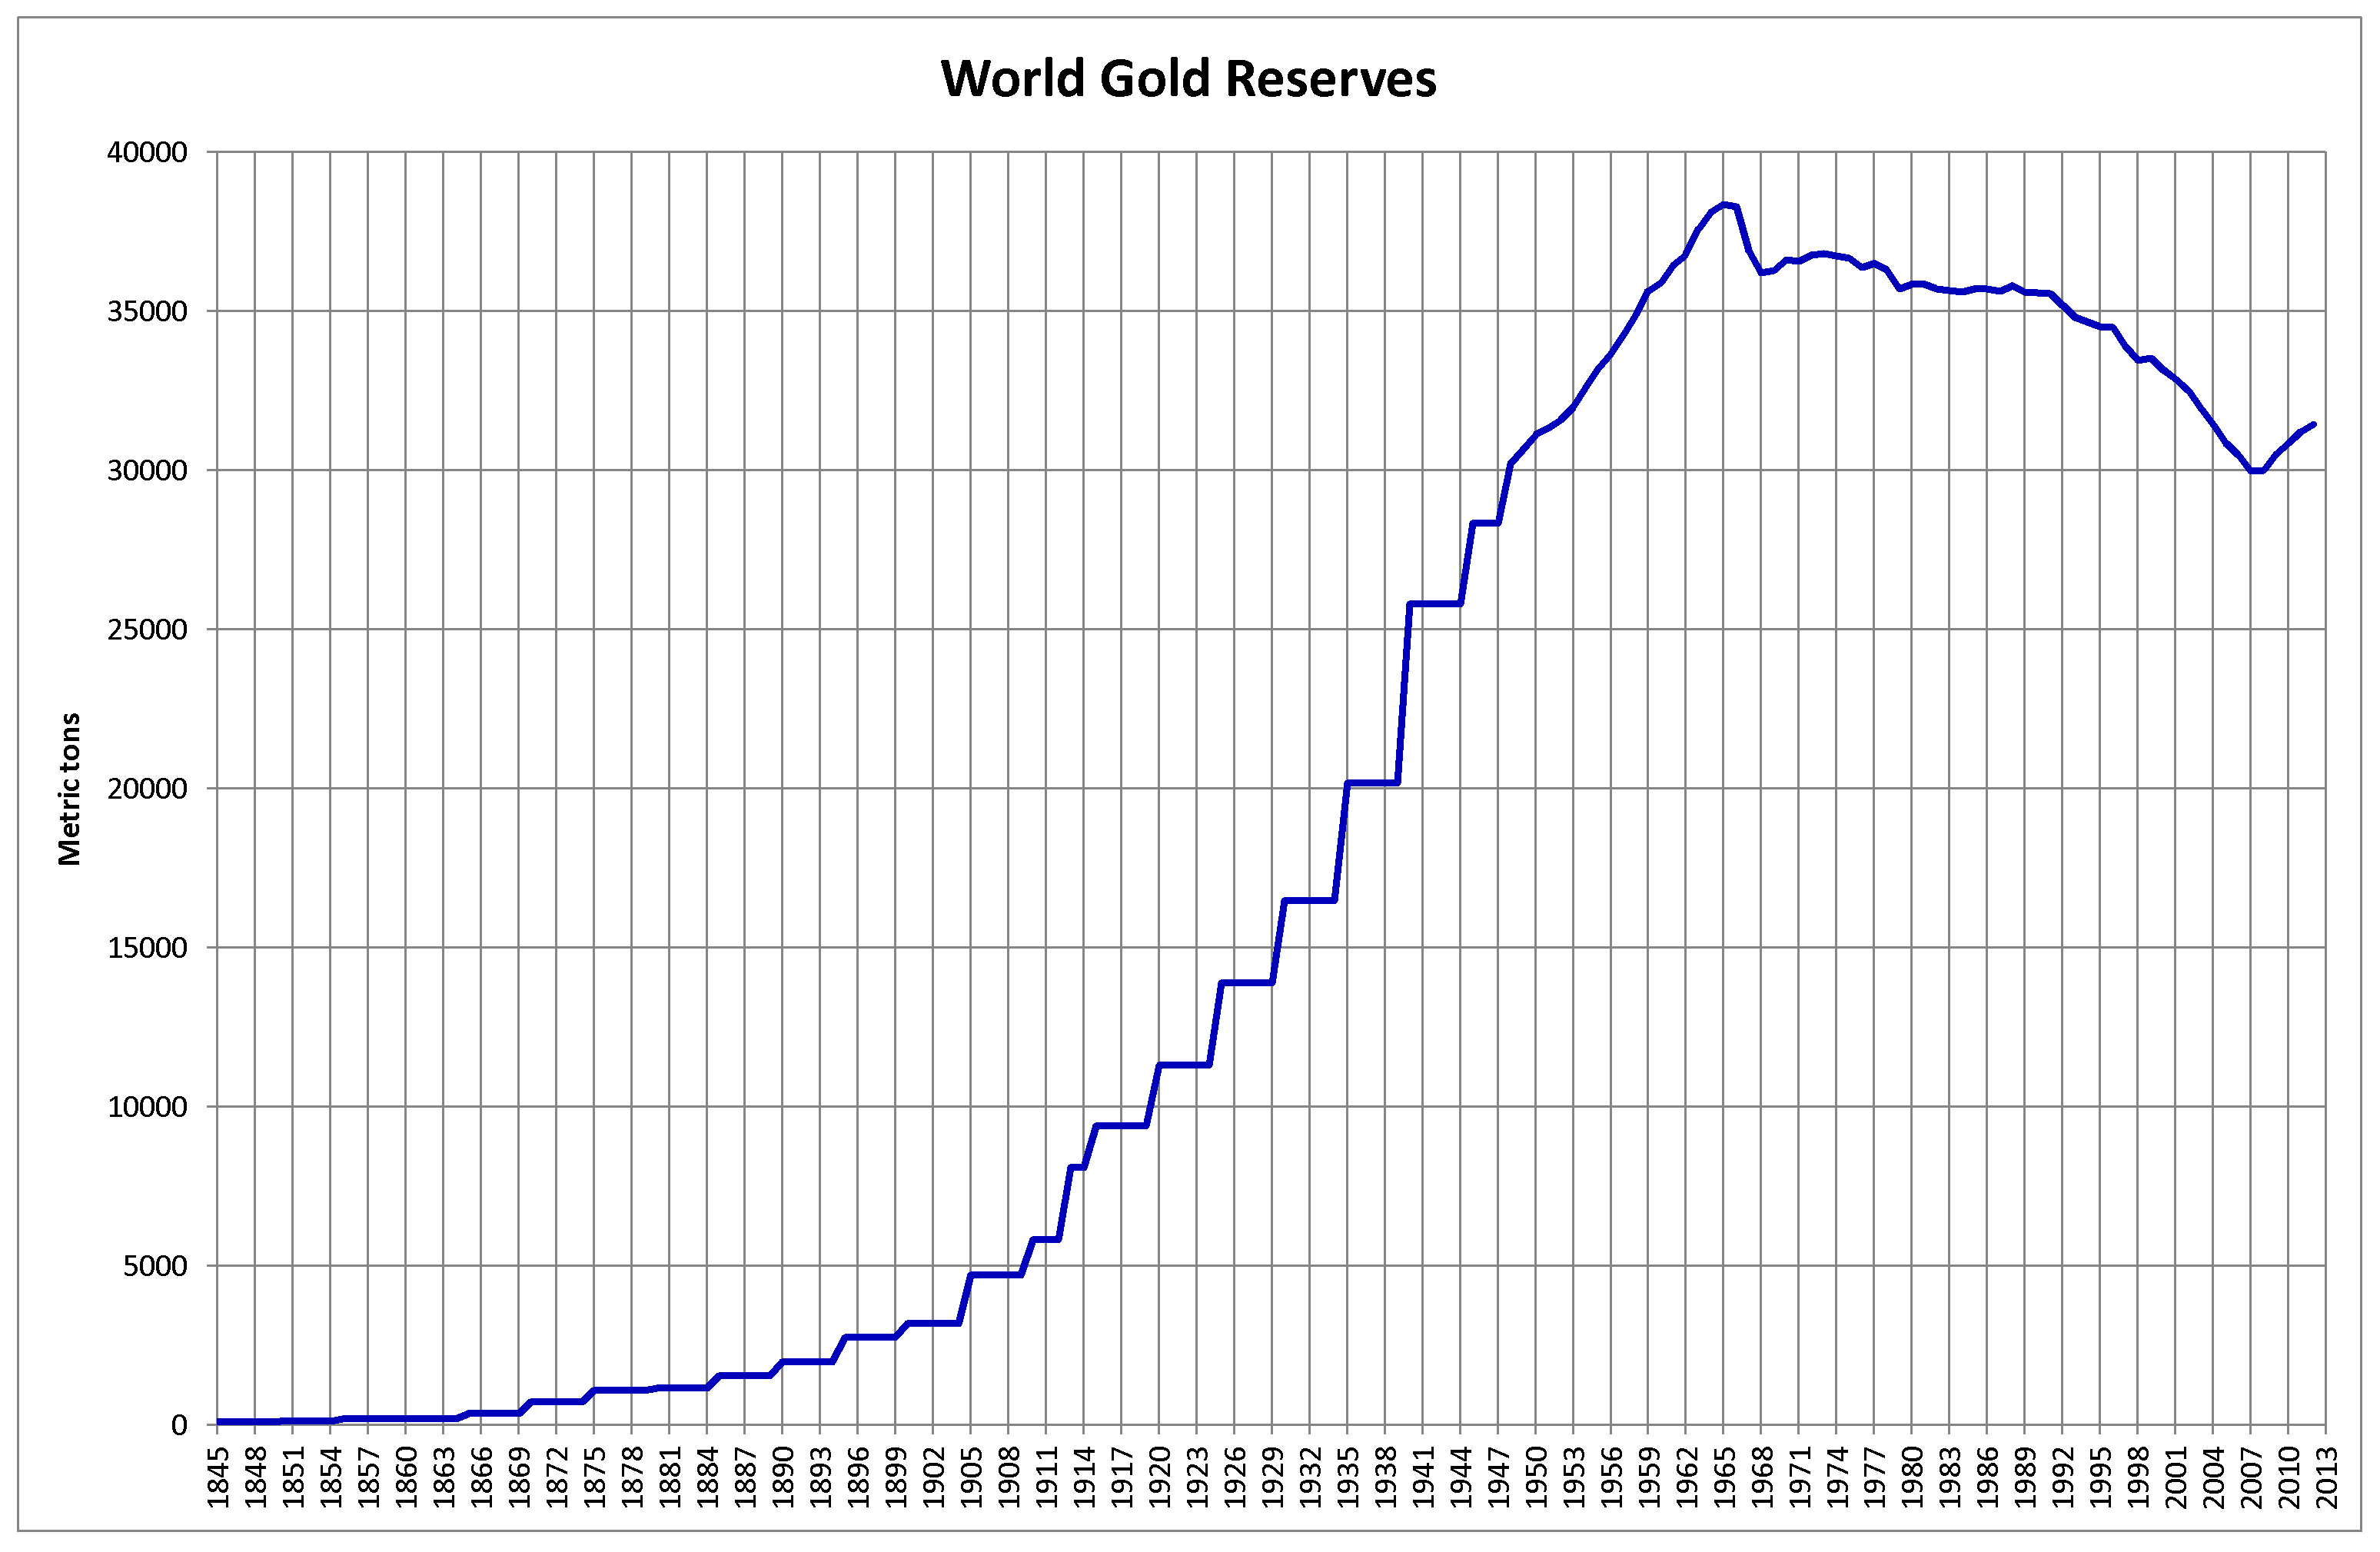 Gold bars and a chart showing the trend of gold reserves over time.